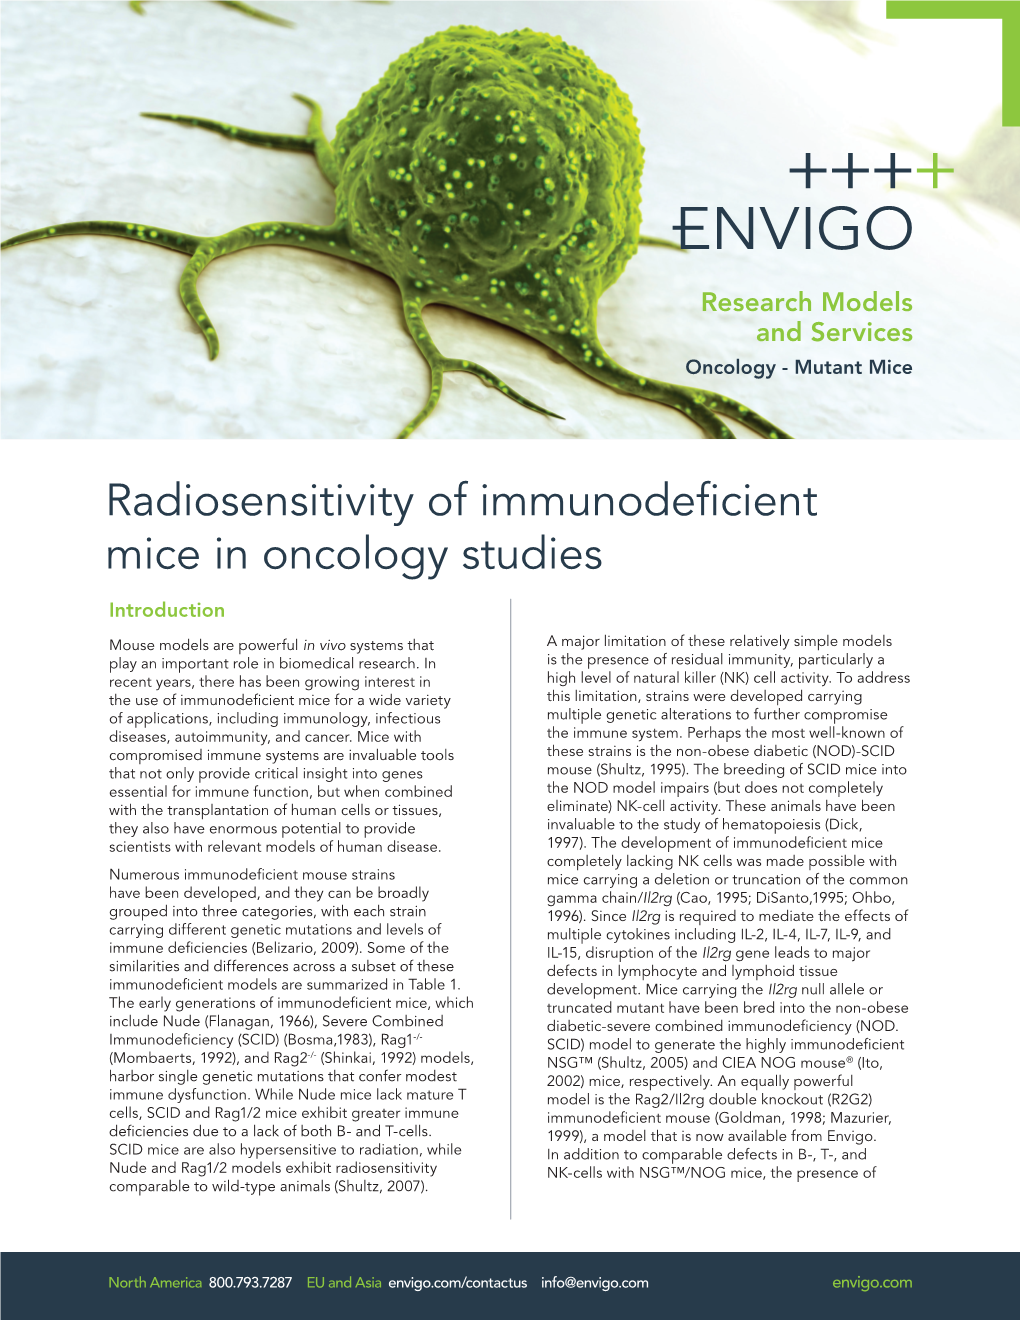 Radiosensitivity of Immunodeficient Mice in Oncology Studies